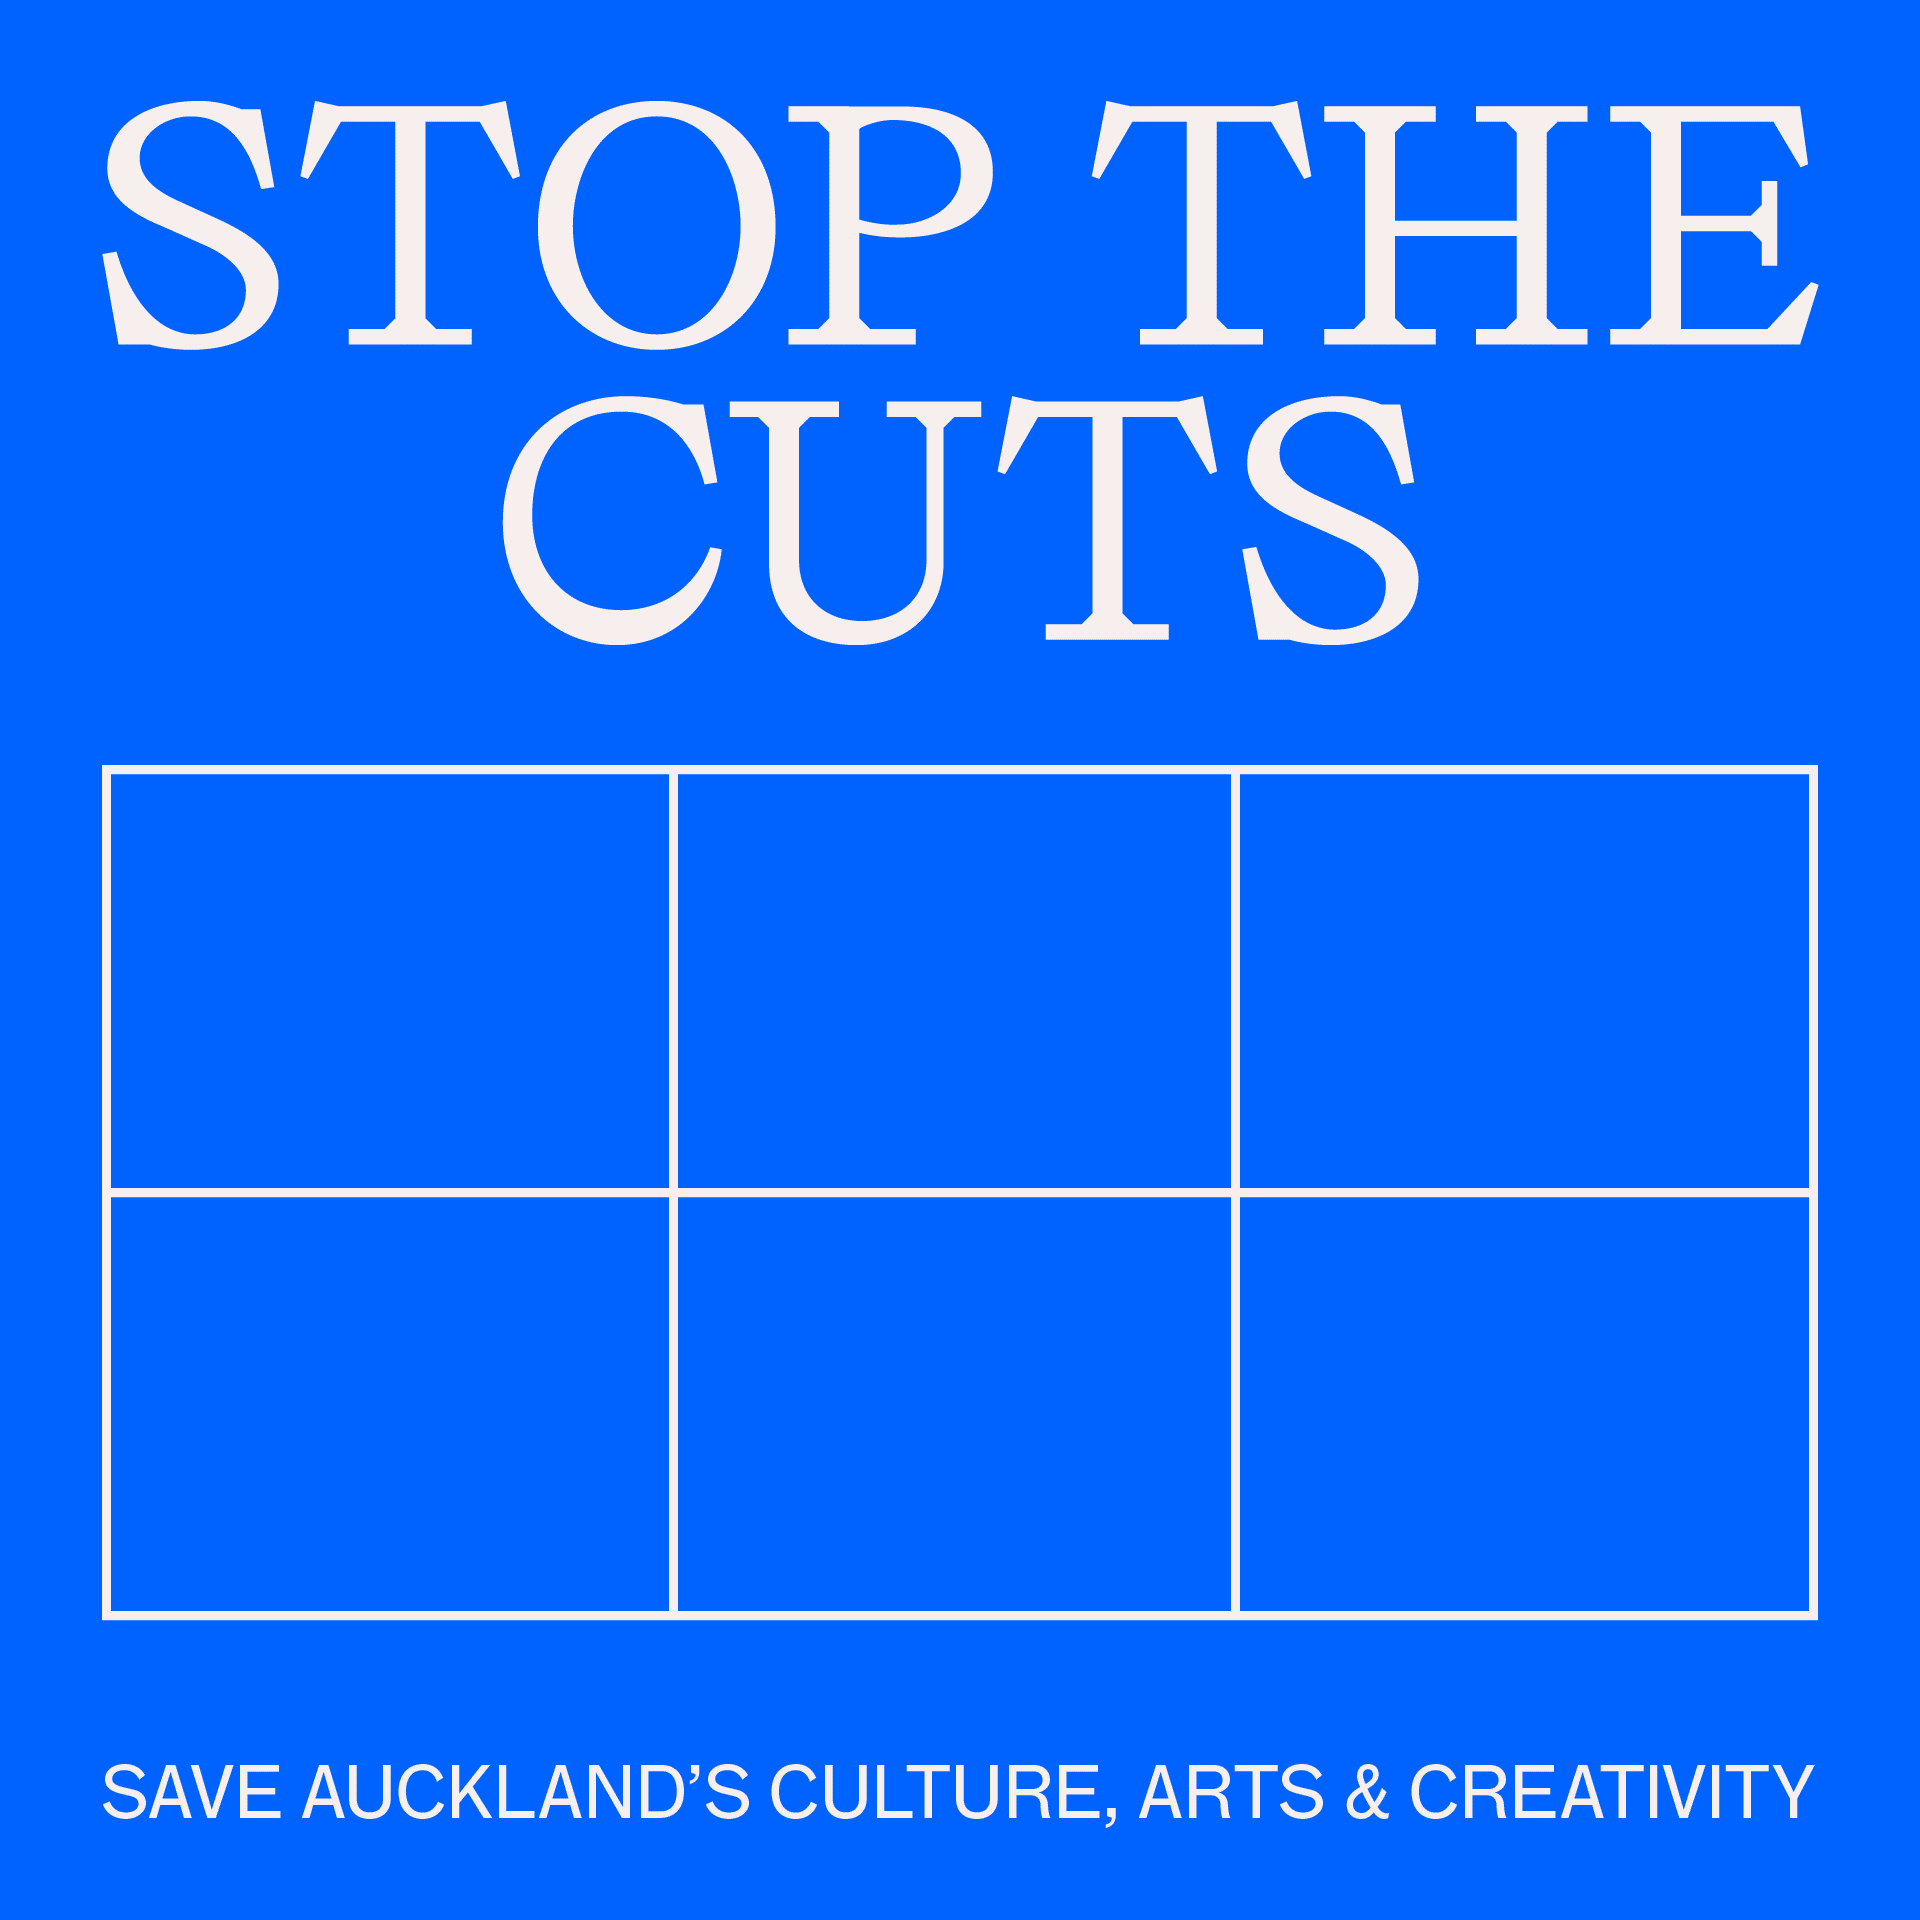 Cover image for the Stop the Cuts campaign to prevent council cuts of the Arts sector.